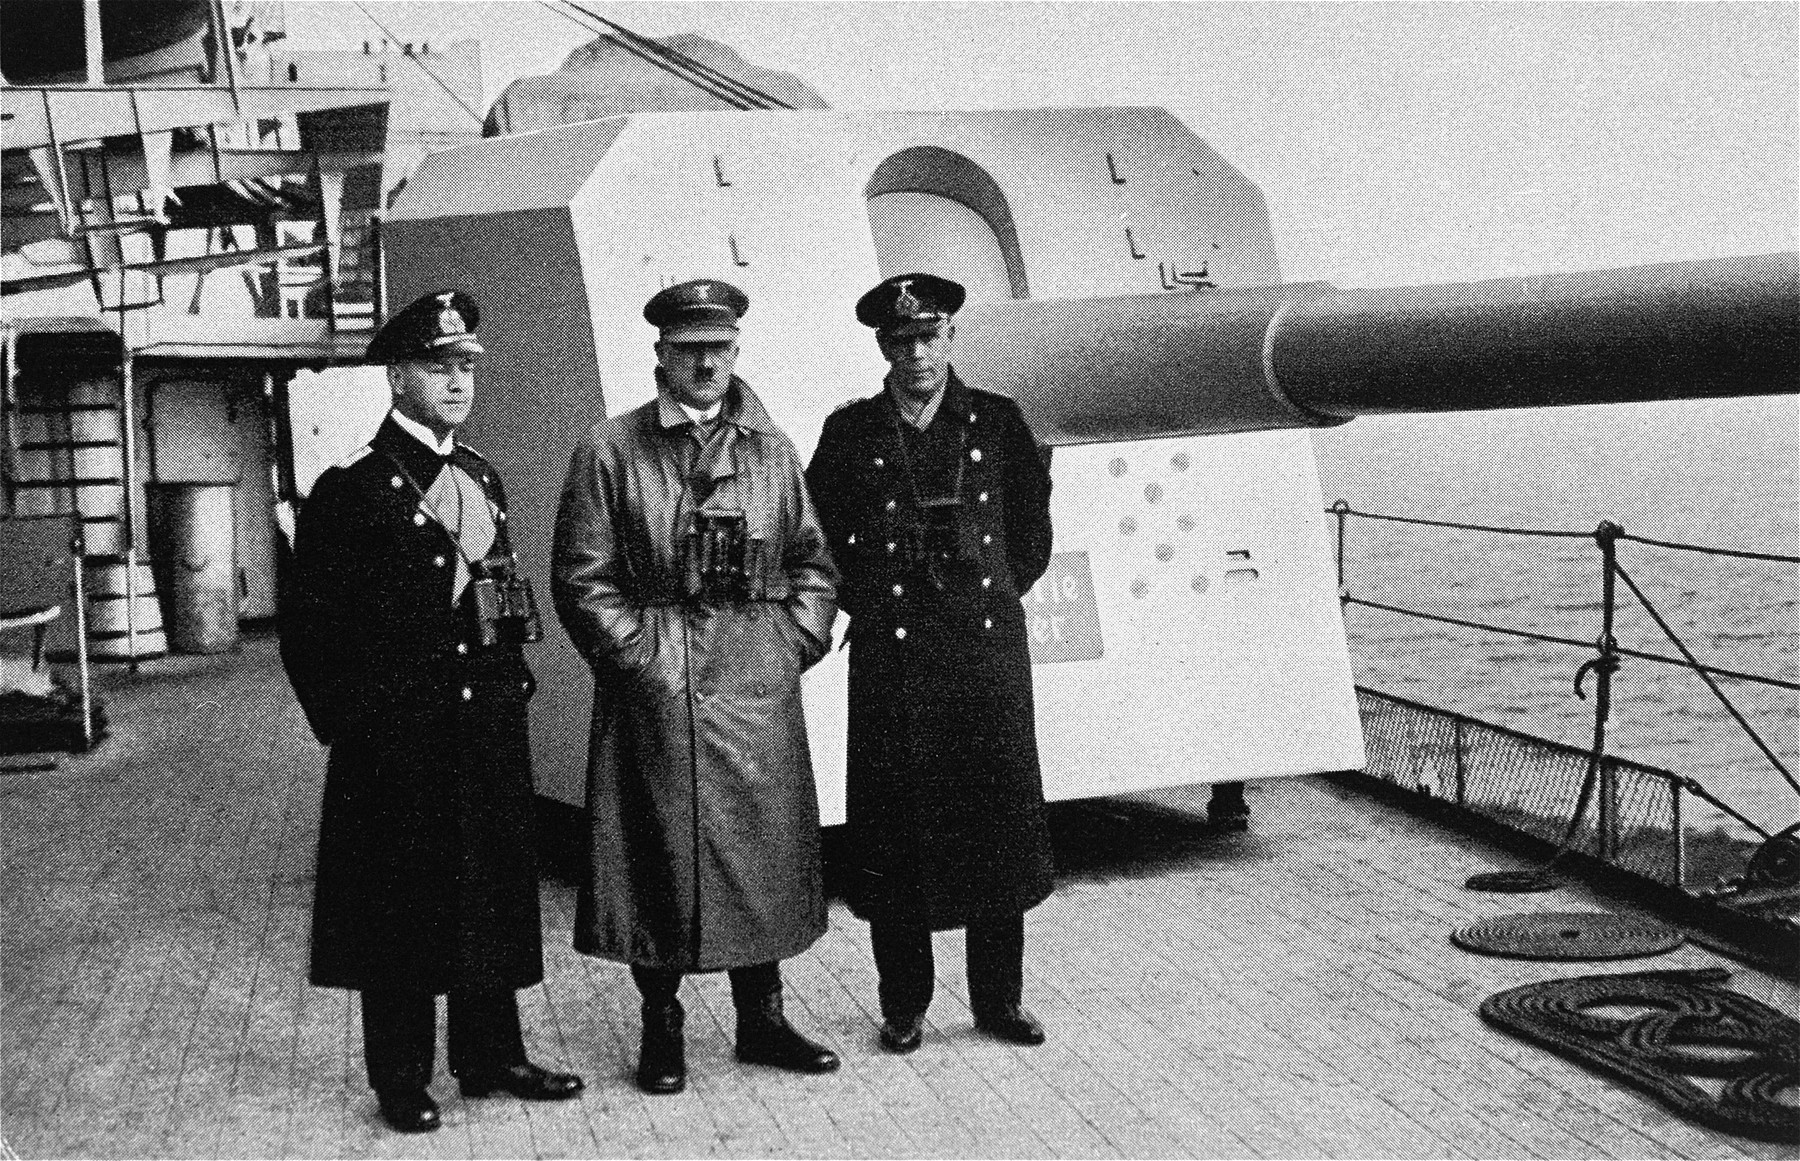 Hitler inspects a German naval warship [perhaps the Deutschland]. 

To his left is Admiral Erich Raeder.  On the right is most probably,  Captain Hermann v. Fischel, commander of the Deutschland from 01 Apr 1933 to 29 Dec 1935.